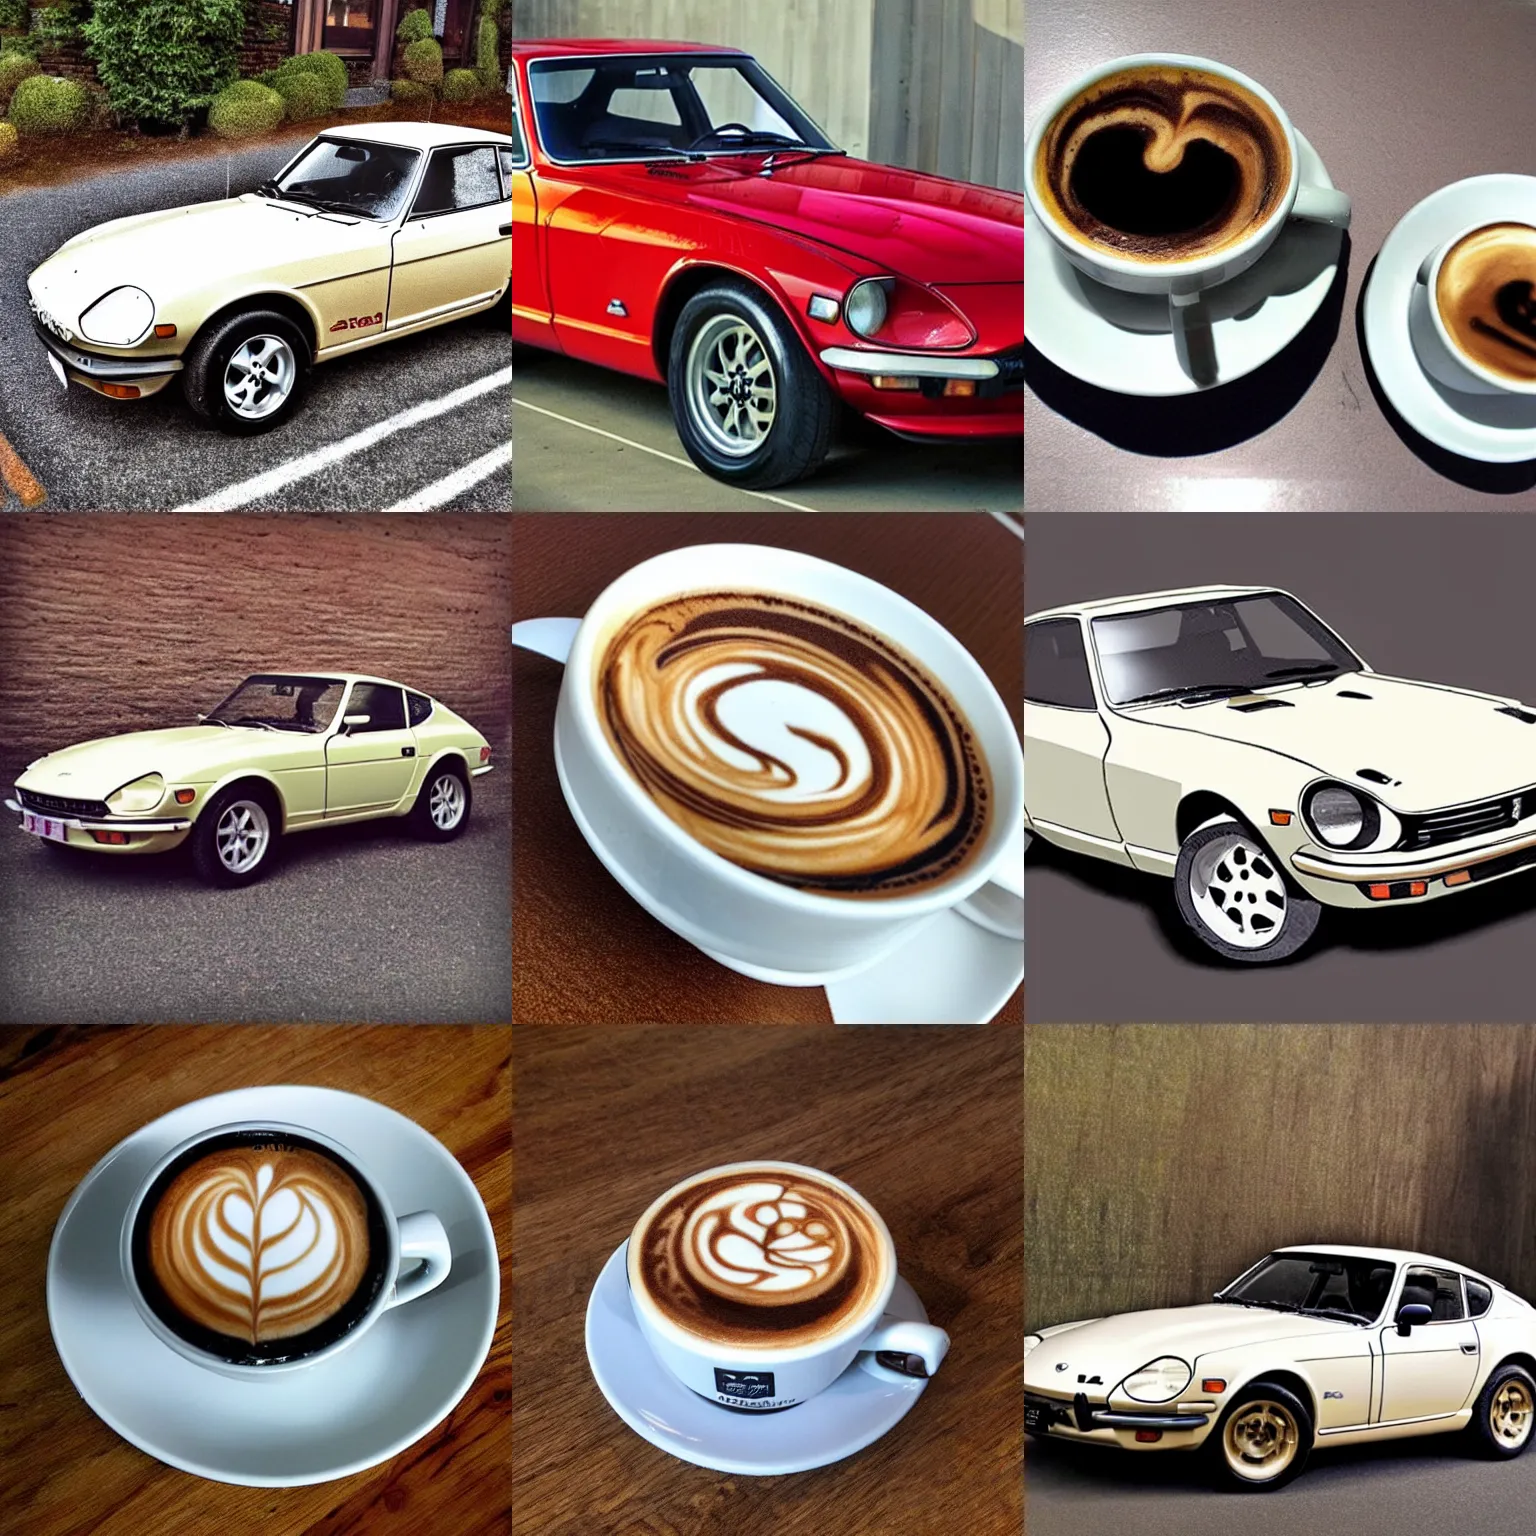 Prompt: a datsun 2 4 0 z in the art style of a latte, cappuccino froth coffee art in a white cup